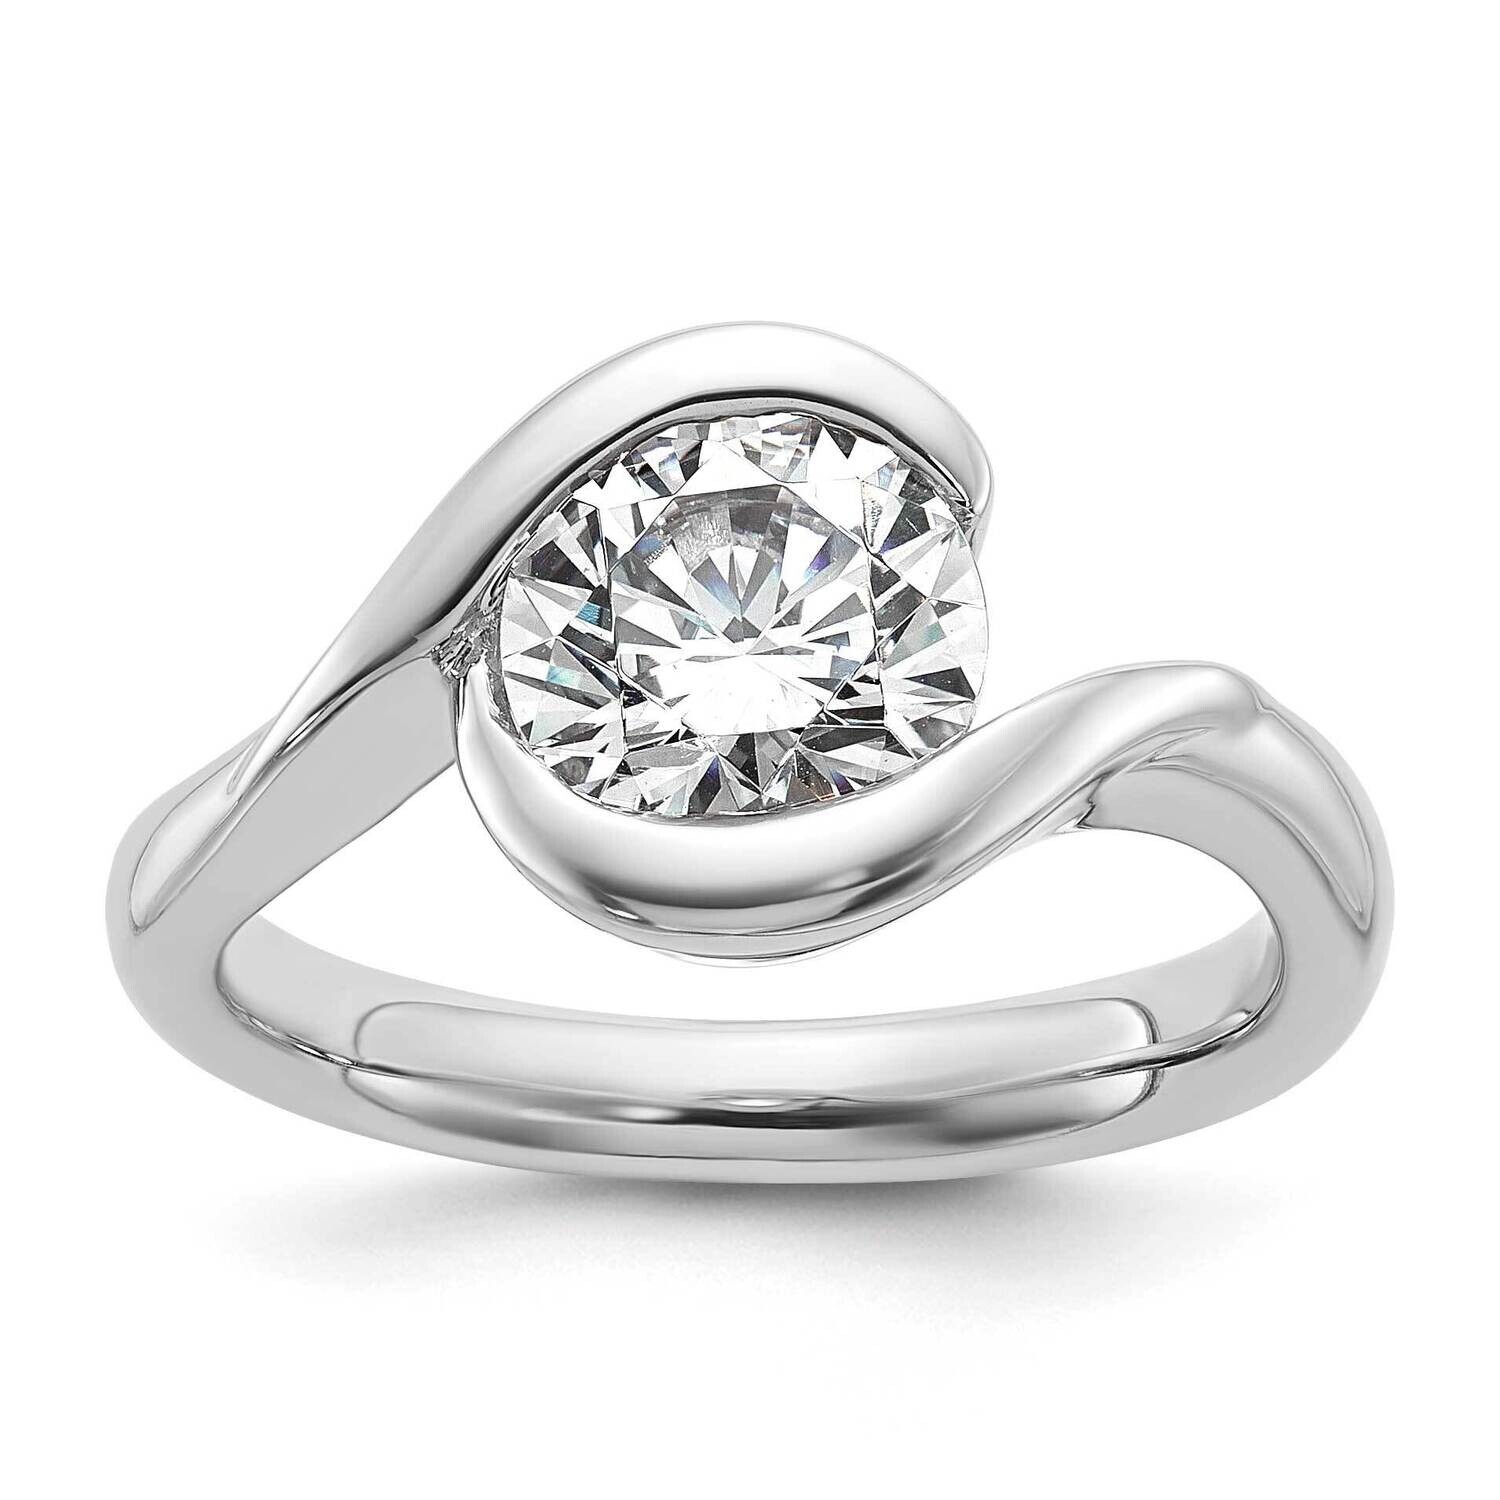 2 Carat 8.20 mm Half-Bezel Bypass Round Solitaire Engagement Ring Mounting 14k White Gold RM1955E-200-W